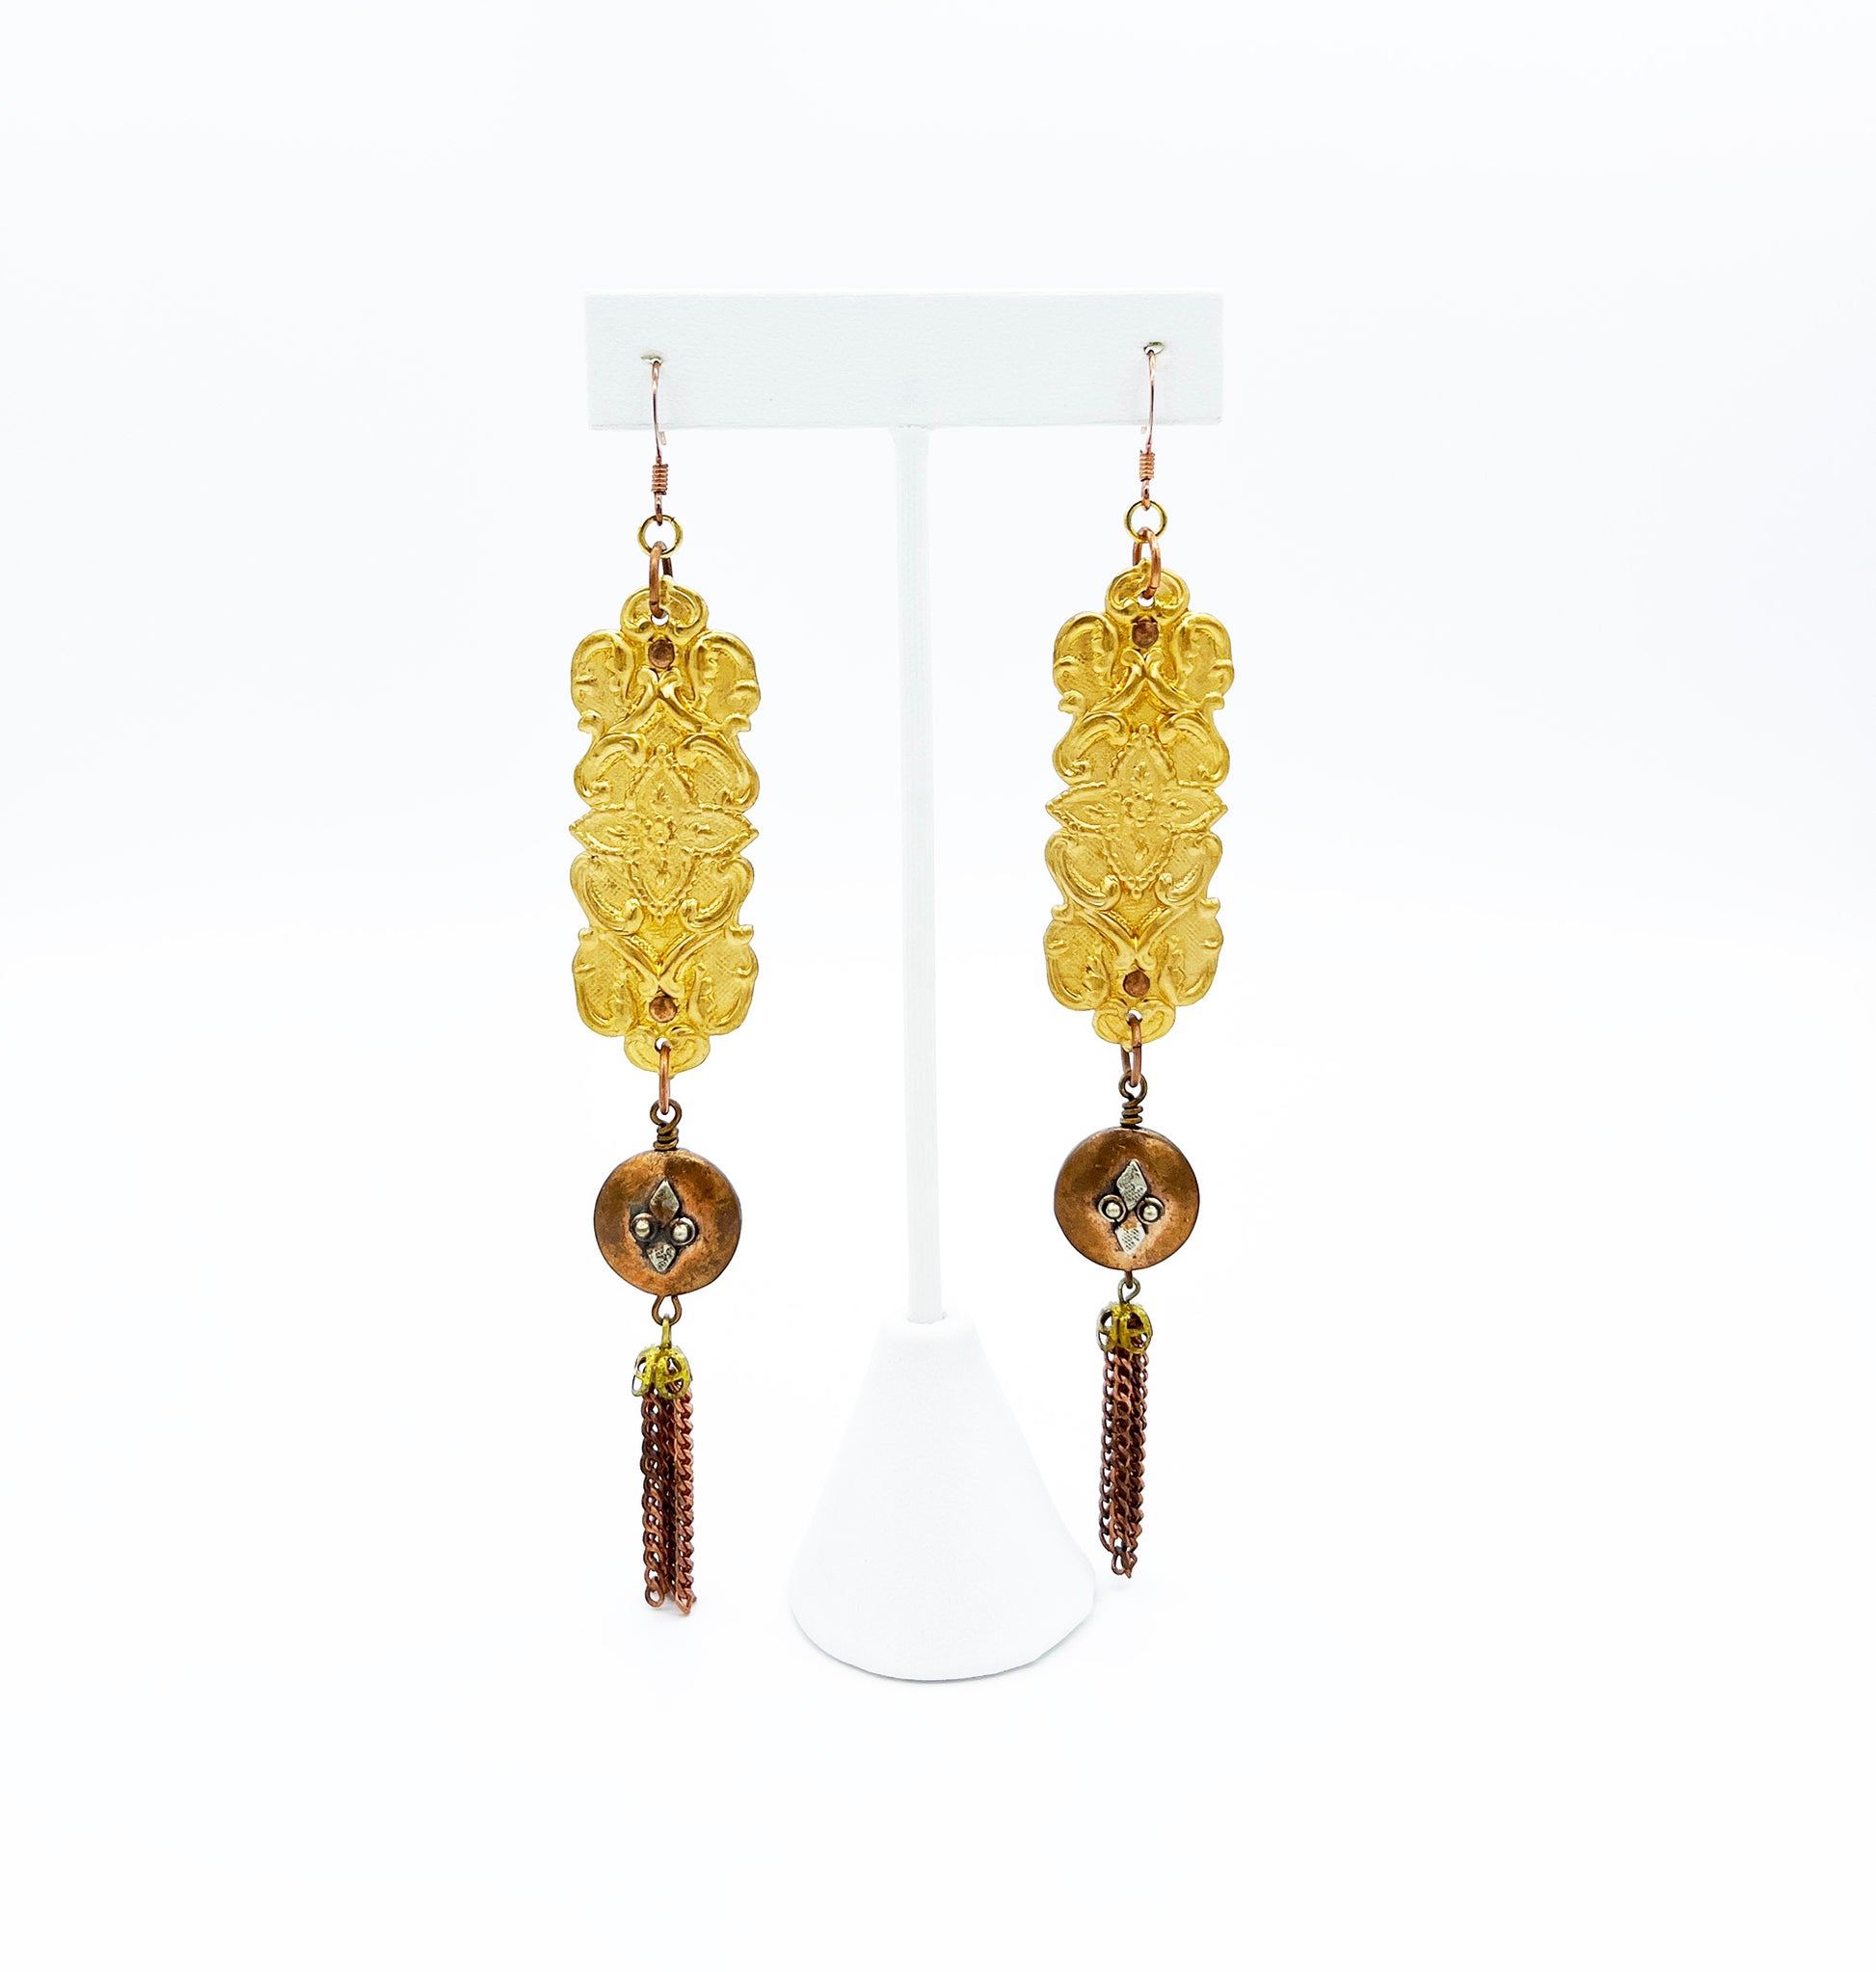 Brass stamped and beaded earrings